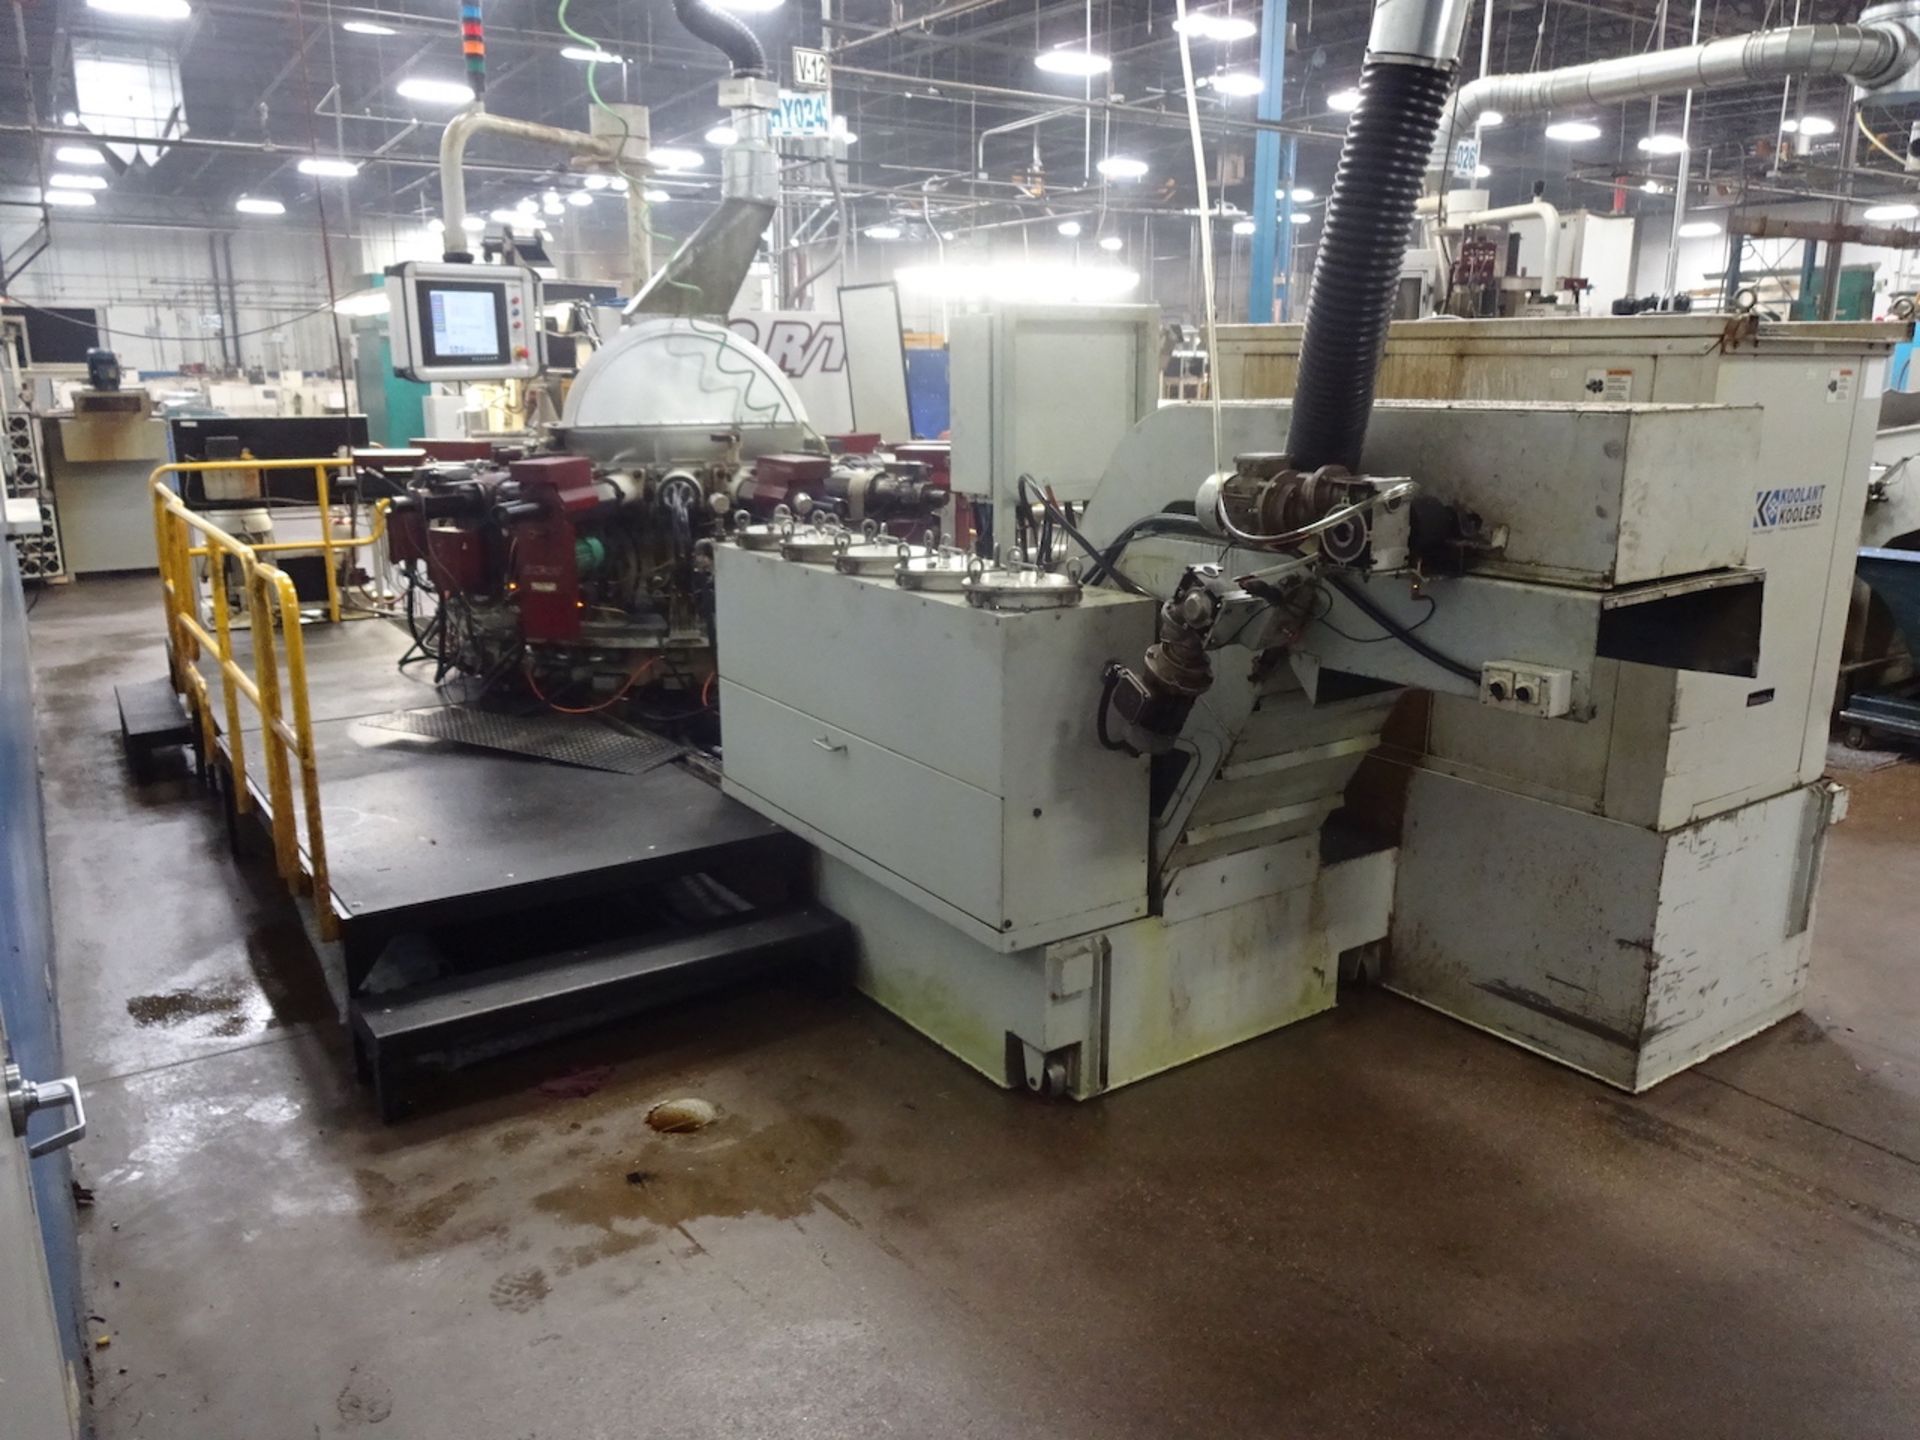 2015 HYDROMAT MODEL EPIC R/T HB32/45-16 ROTARY TRANSFER MACHINE, S/N HB32-743, 16-POSITION, 12-HEAD, - Image 5 of 7